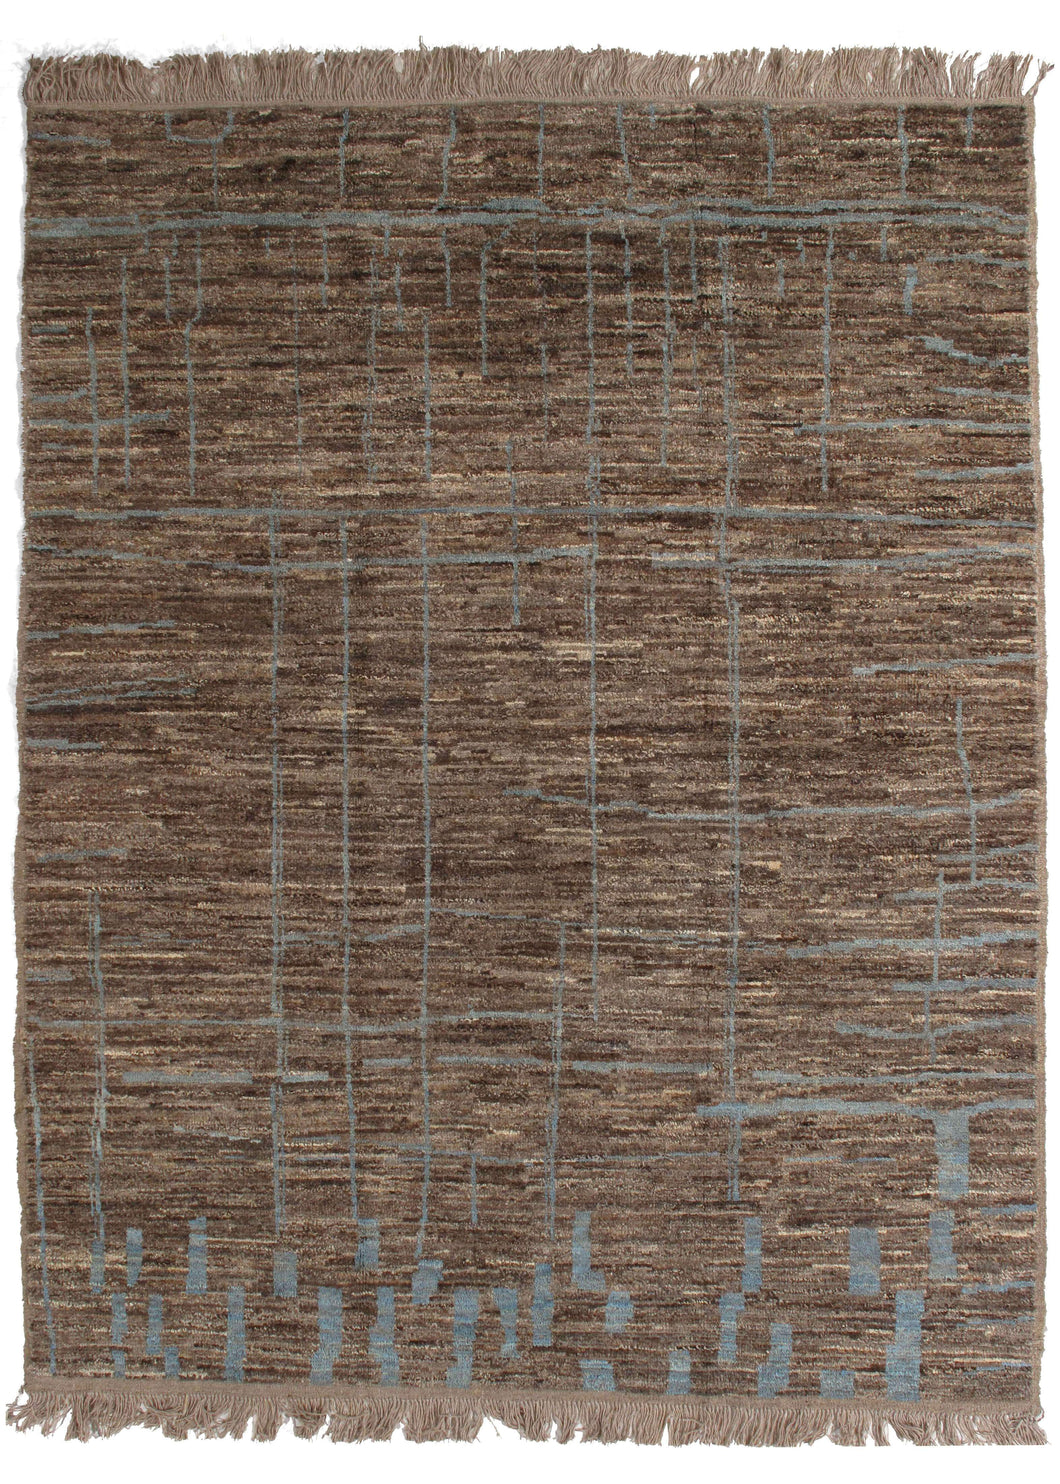 Contemporary Modern handwoven brown supple hanndled Afghani Rug with blue textural design